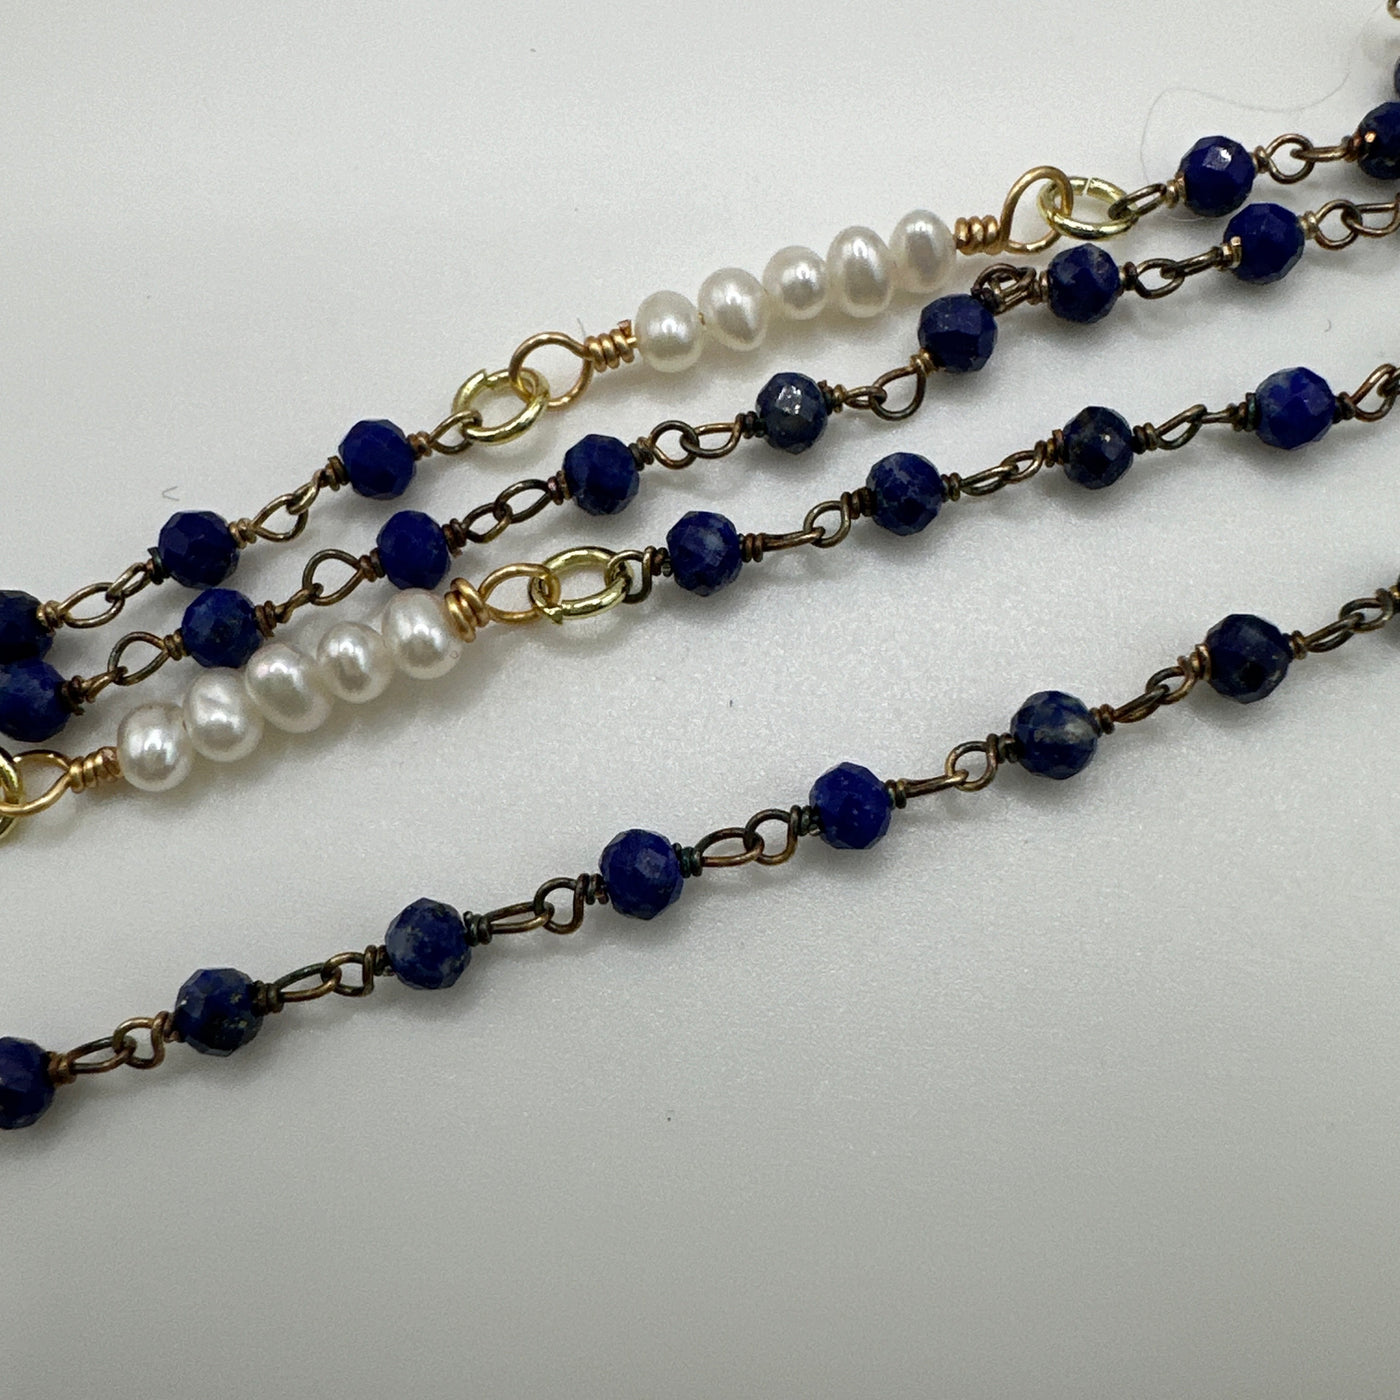 Scarf long necklace silver 925 with blue beads and white pearls and sparkling blue pendant